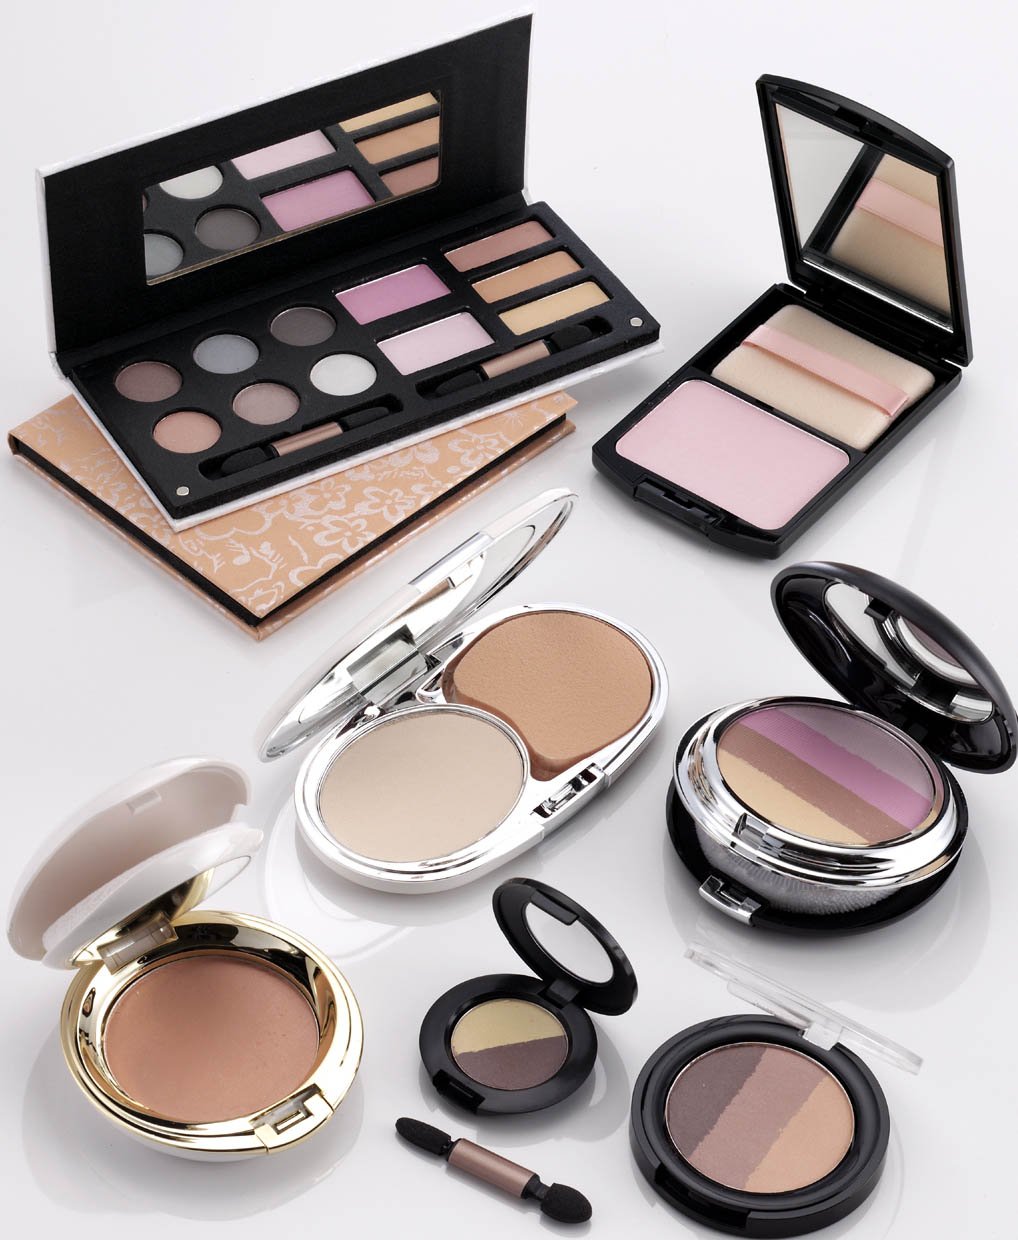 mineral makeup products, buy mineral makeup products from alibaba.com